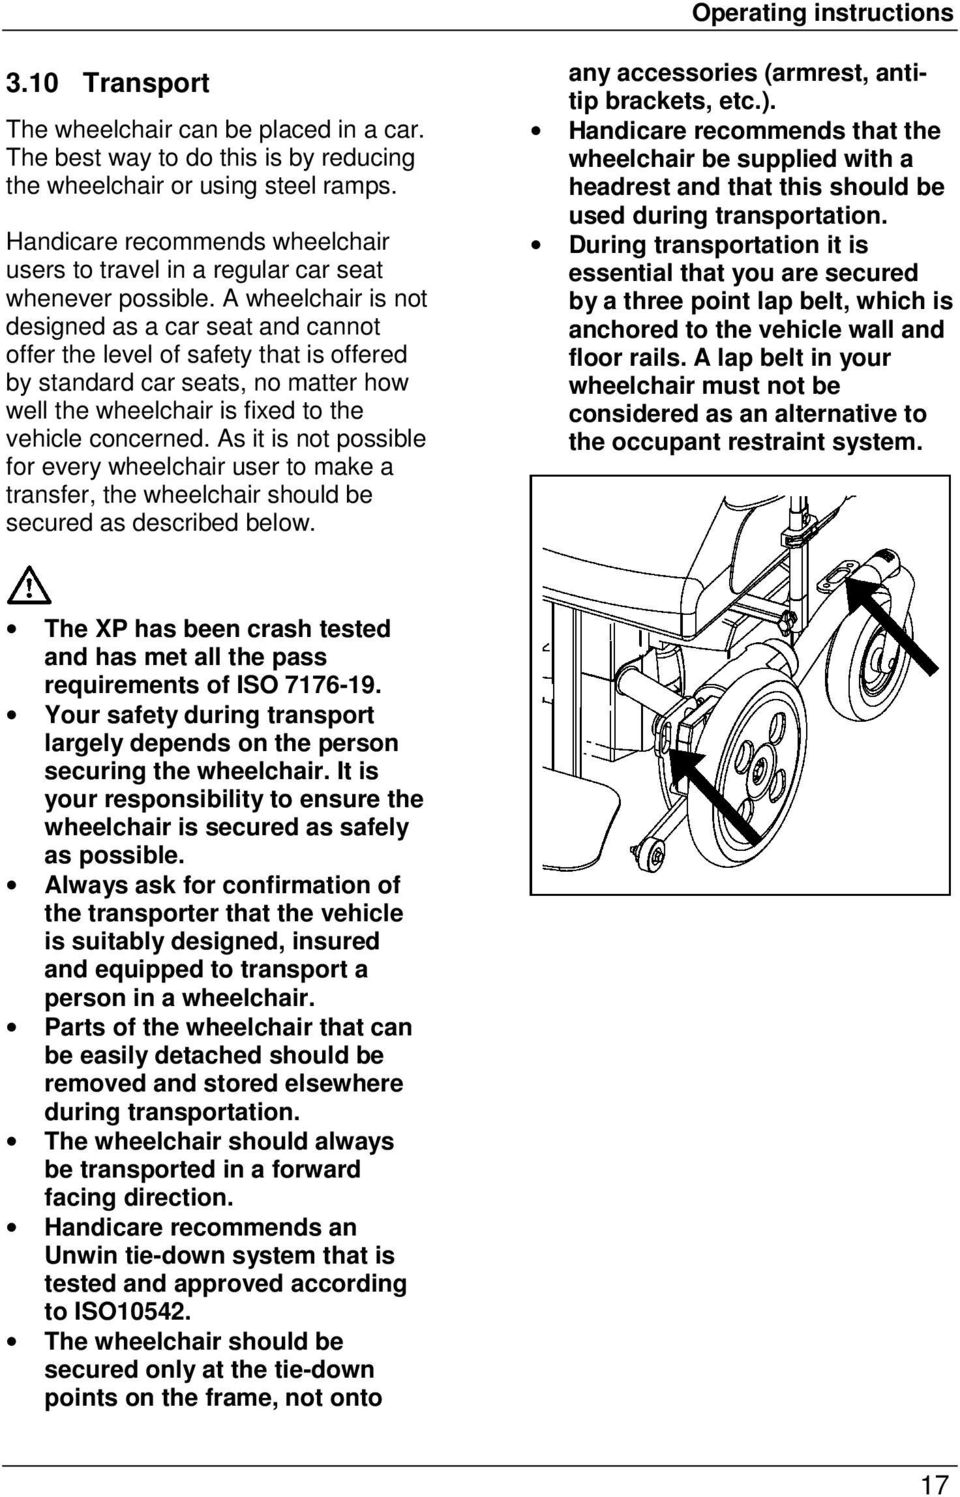 A wheelchair is not designed as a car seat and cannot offer the level of safety that is offered by standard car seats, no matter how well the wheelchair is fixed to the vehicle concerned.